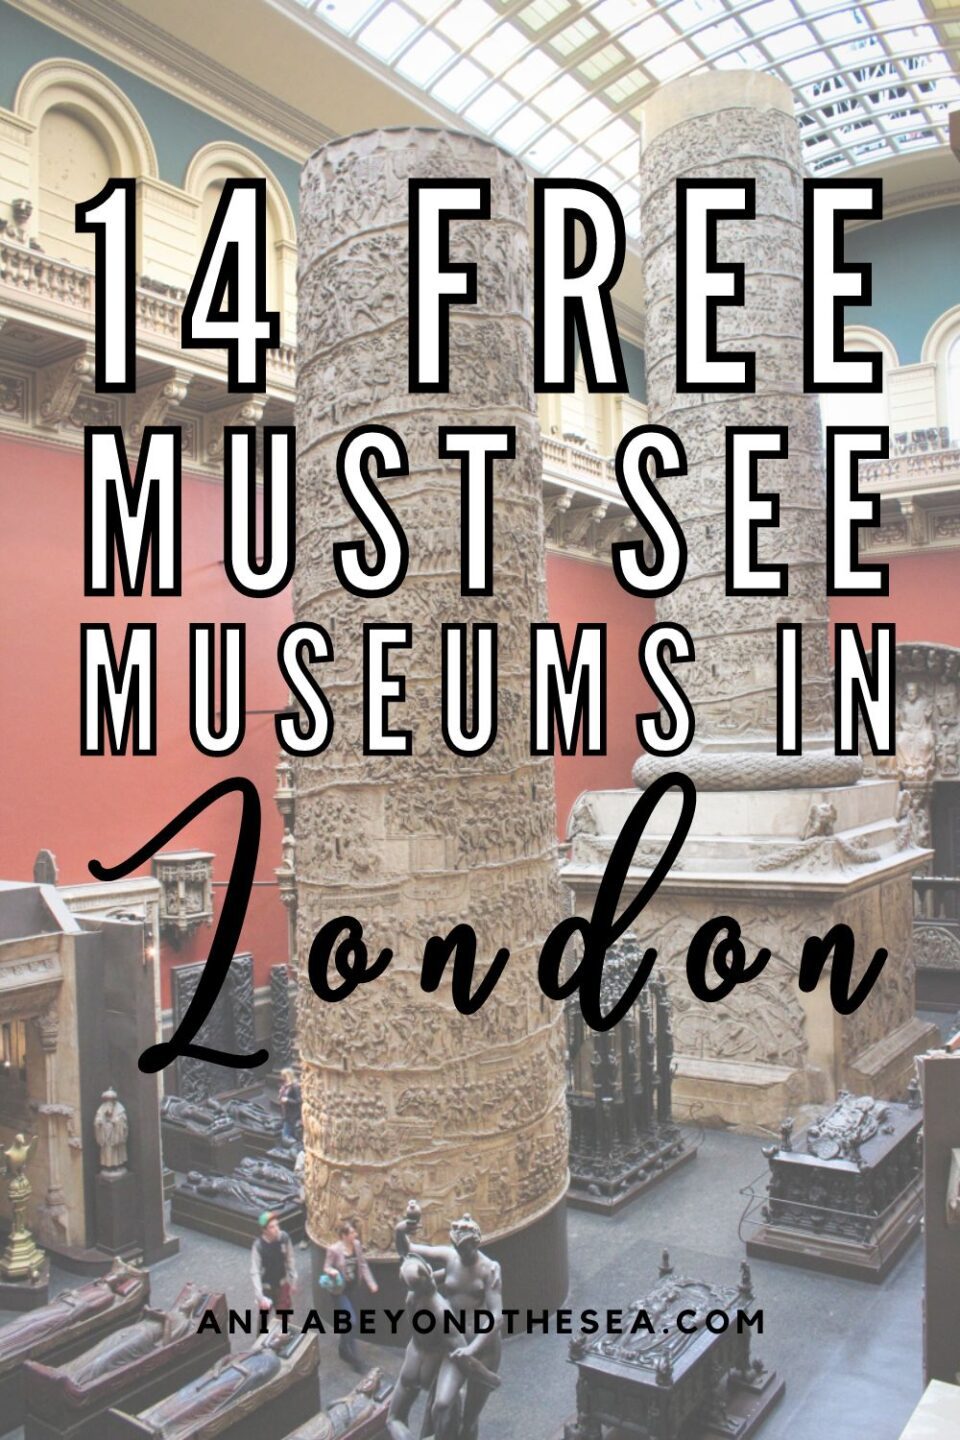 FREE Museums in London